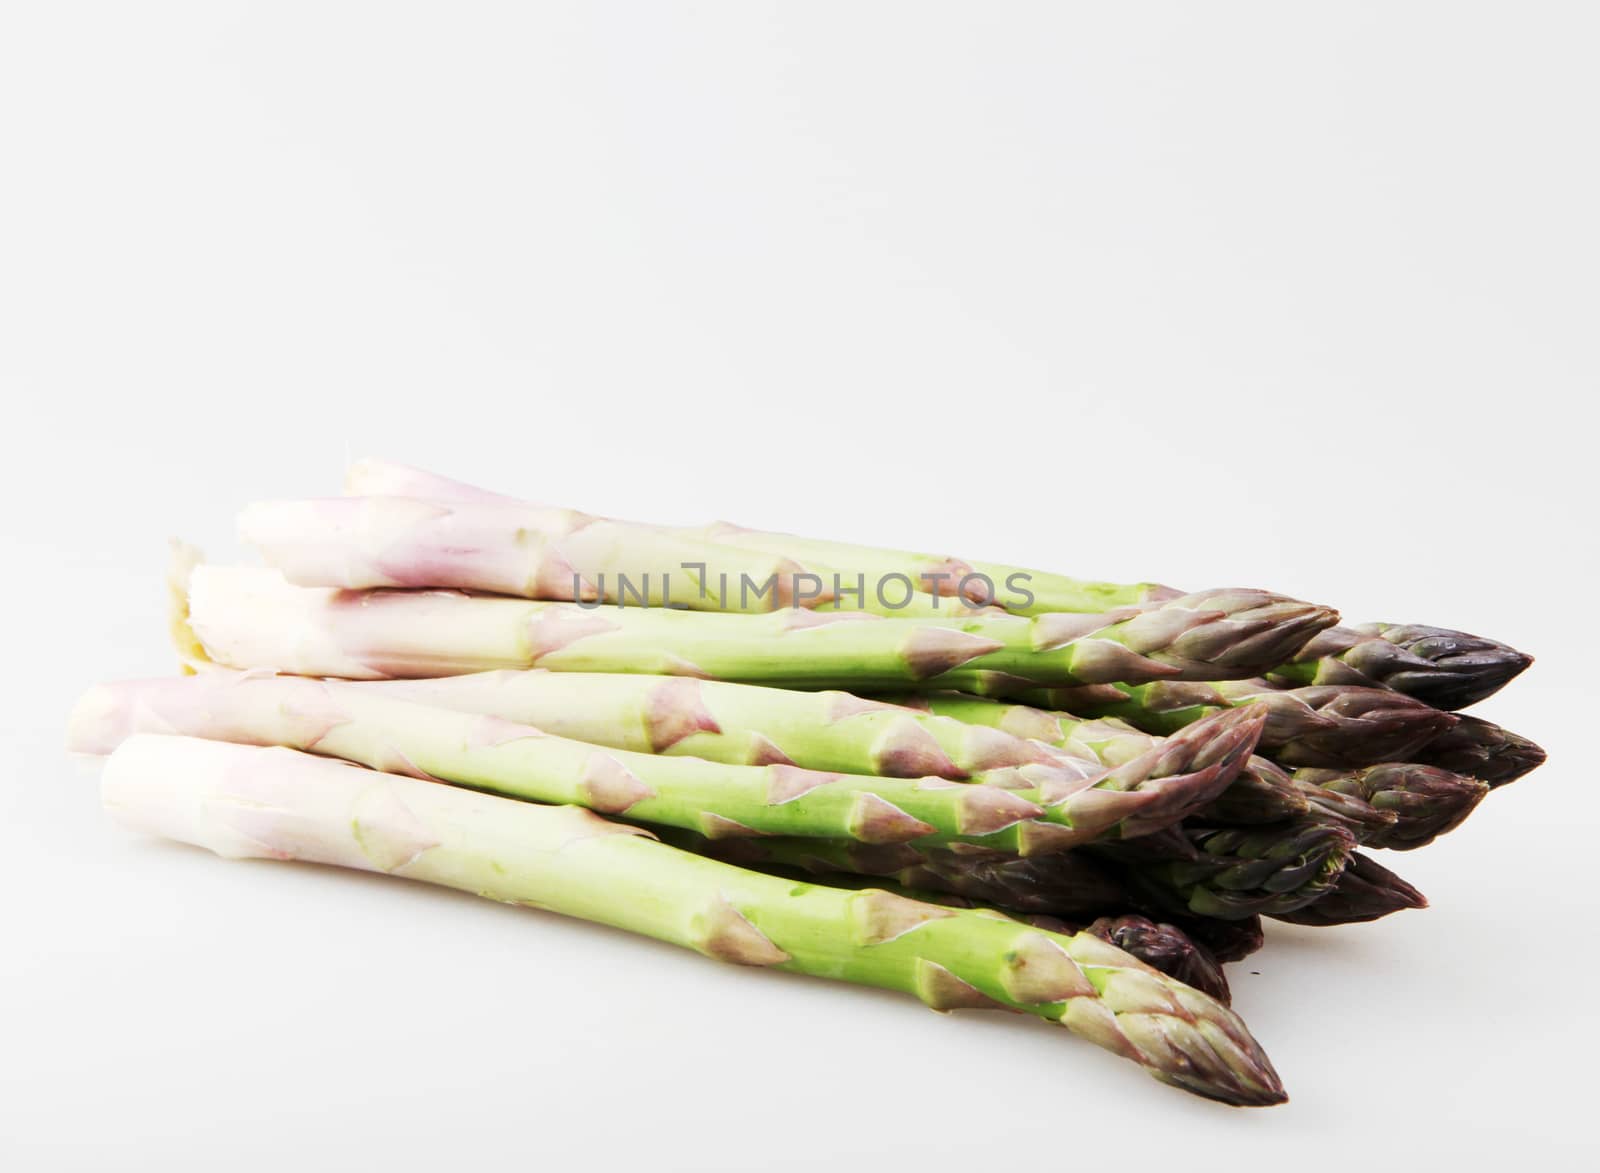 Close-Up Of Asparaguses Against White Background